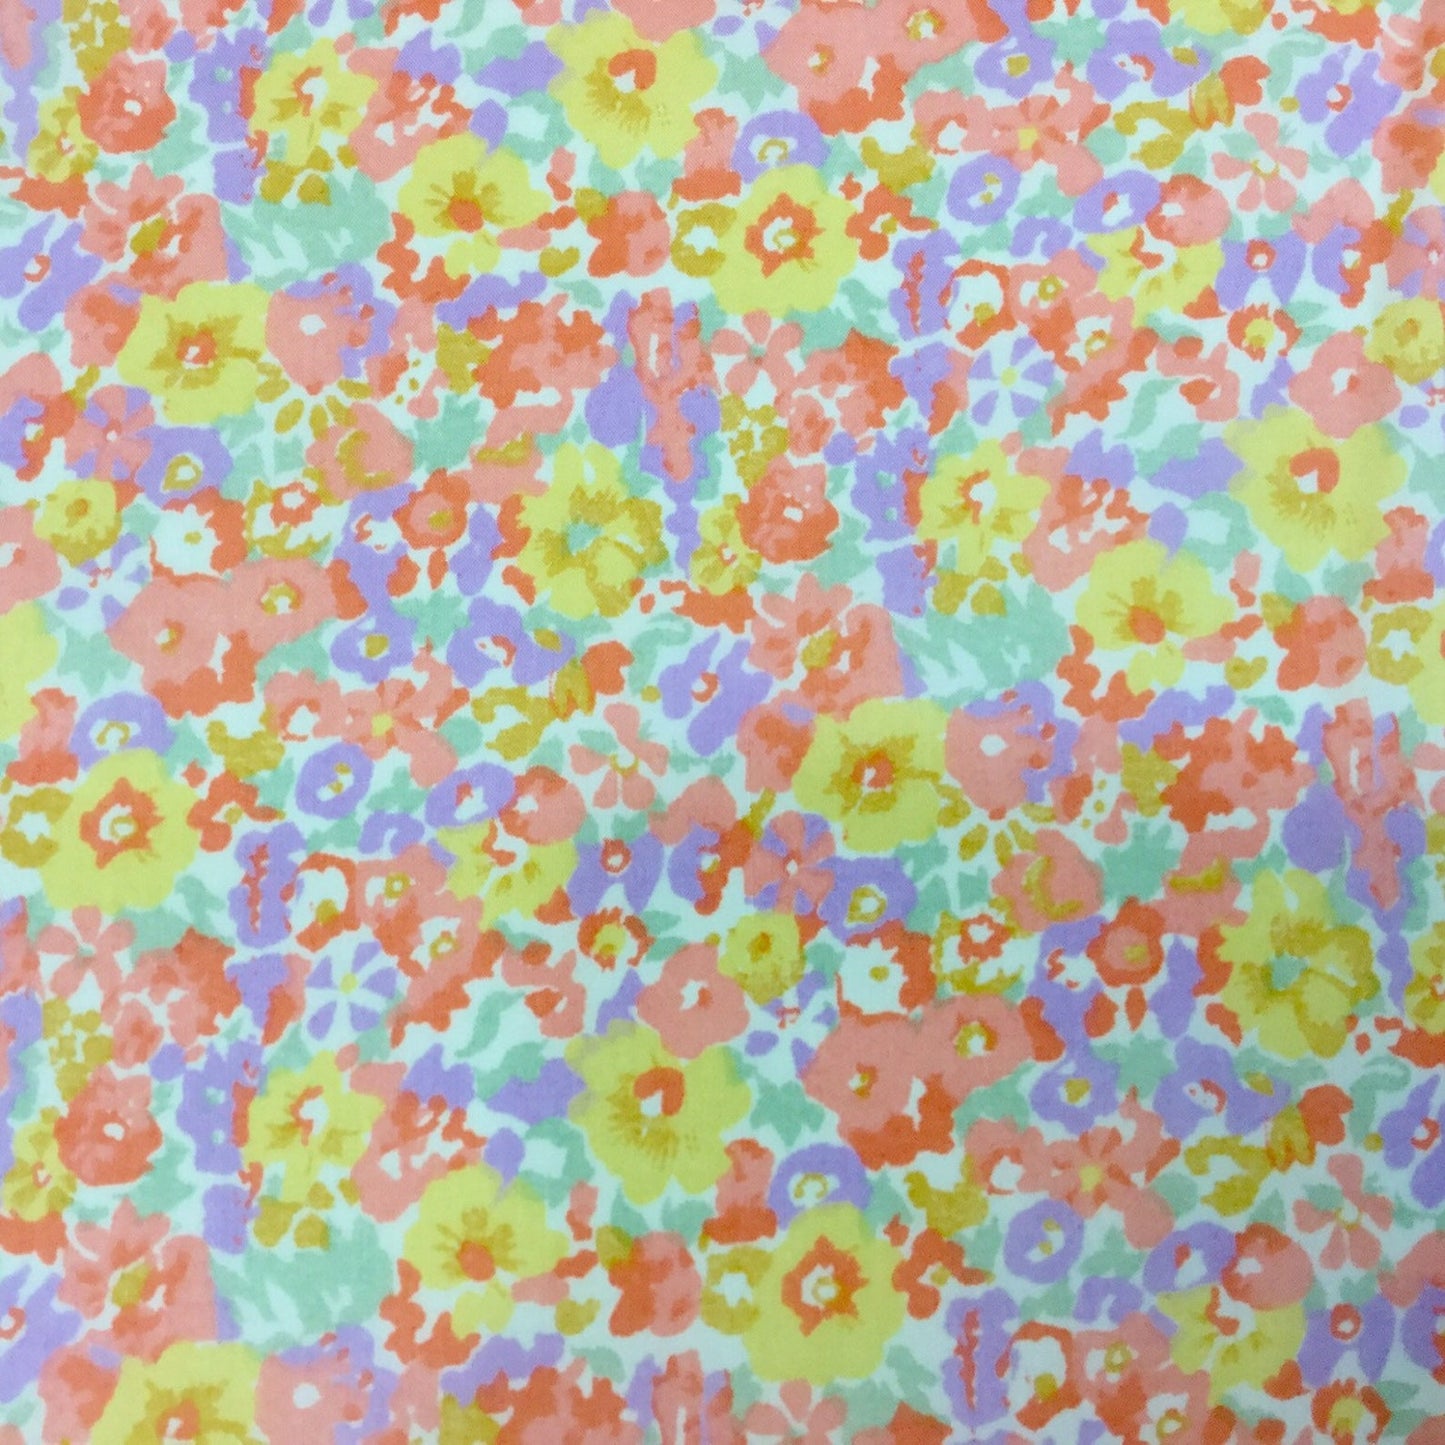 1950s 60s Cotton Floral Fabric, 3 Y 25", Sold as a Whole, Vintage Sewing Fabric, Peach Yellow Lavender Small Scale Floral Print